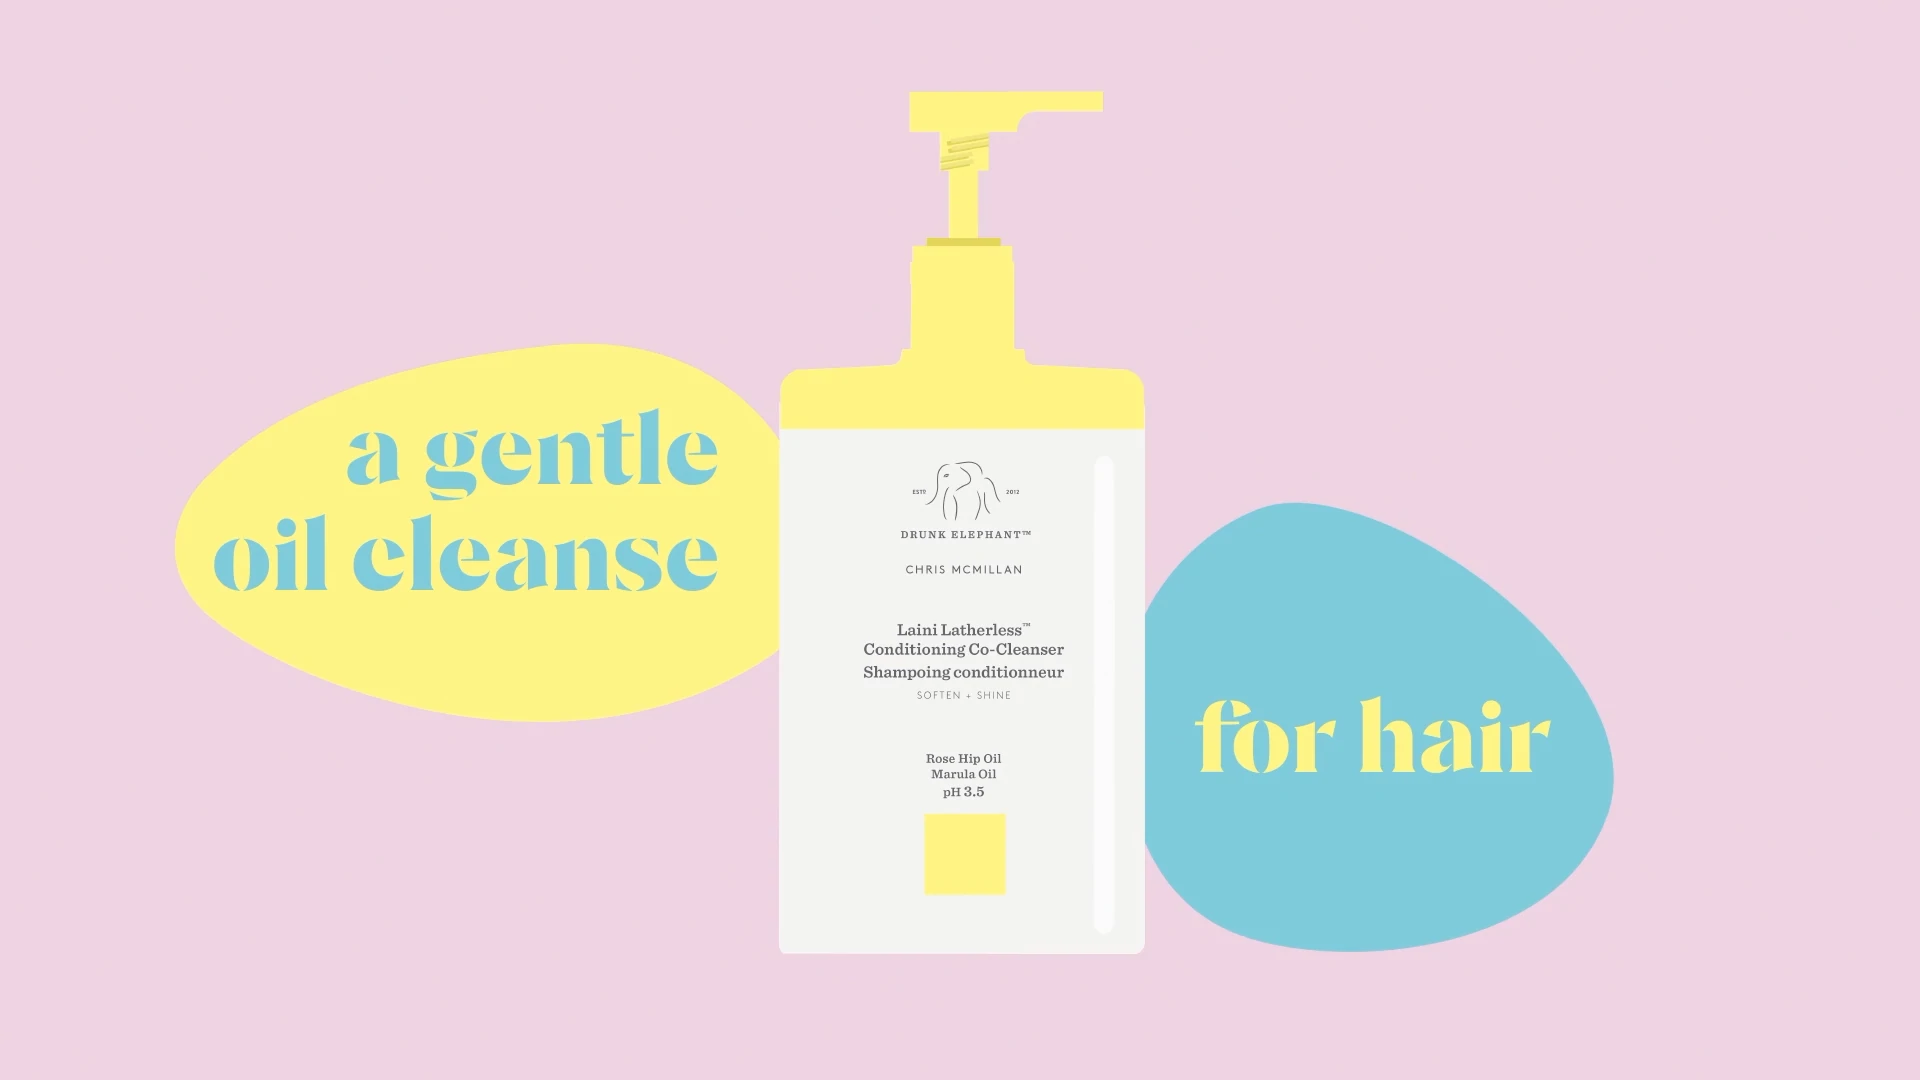 Introducing Laini Latherless: a gentle oil cleanse for hair 